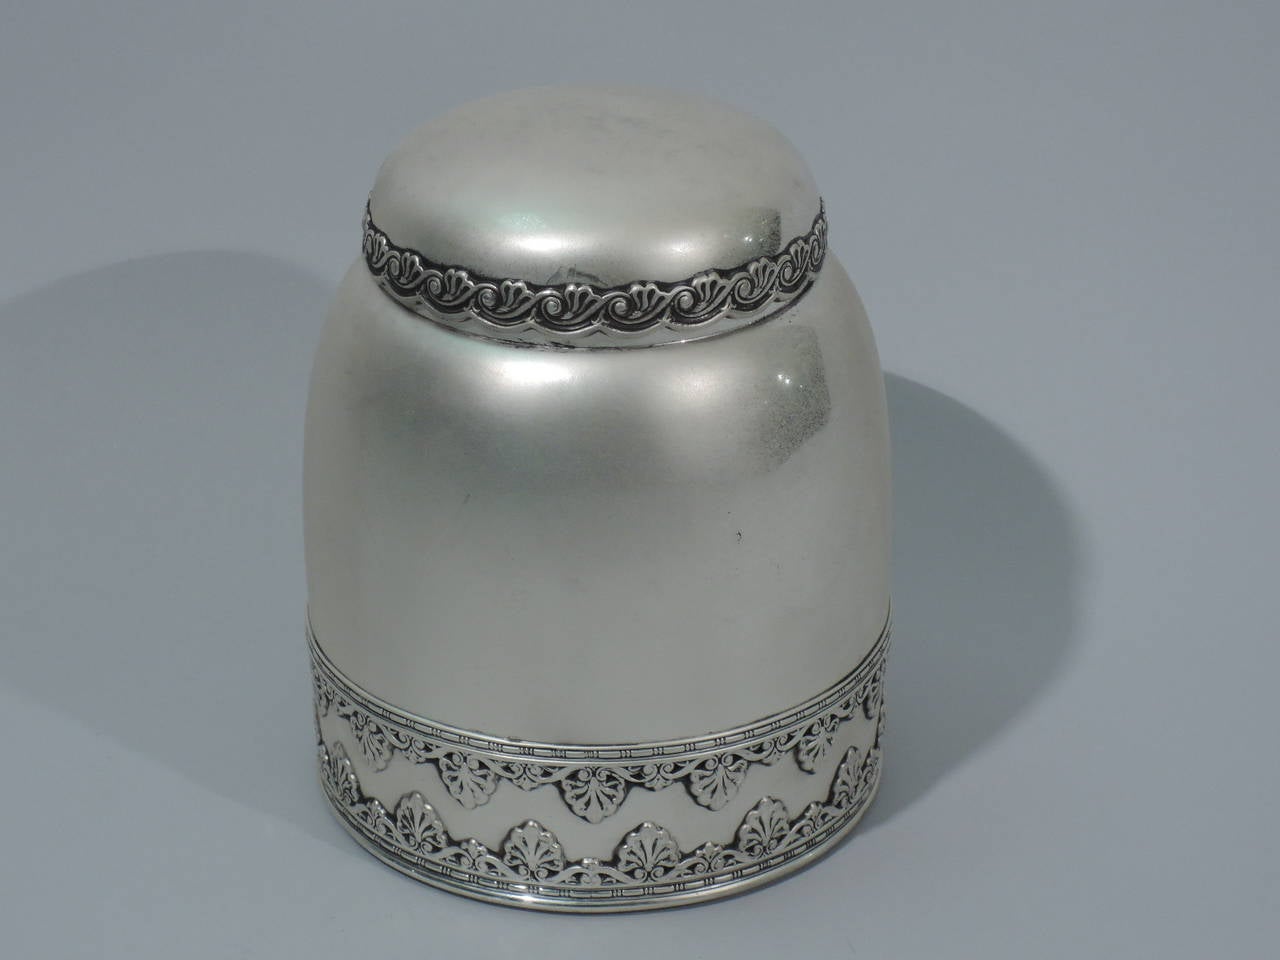 Sterling silver tobacco jar with classical ornament. Made by Whiting in New York, ca. 1890. Upward tapering sides, curved shoulder and hinged and round cover. At bottom are applied bands of palmette and bead and reel ornament. Cover rim is scalloped